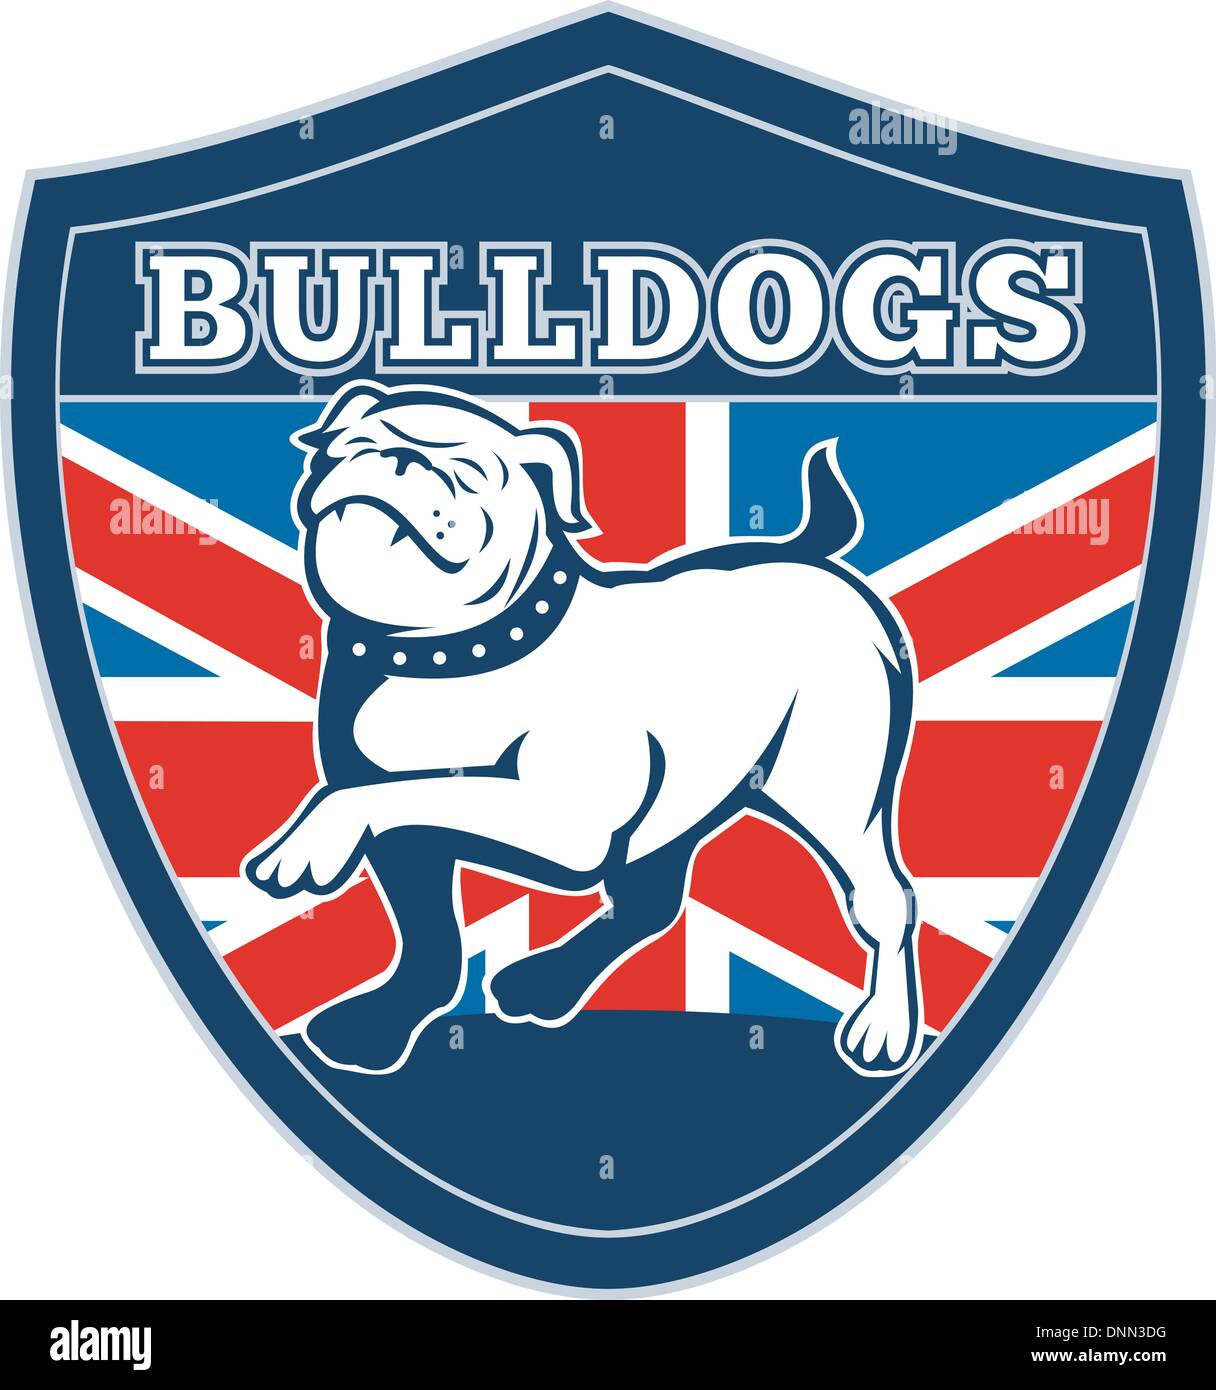 illustration of a Proud English bulldog marching with Great Britain or British flag in background set inside a shield with words bulldogs' suitable for any sports team mascot' Stock Vector